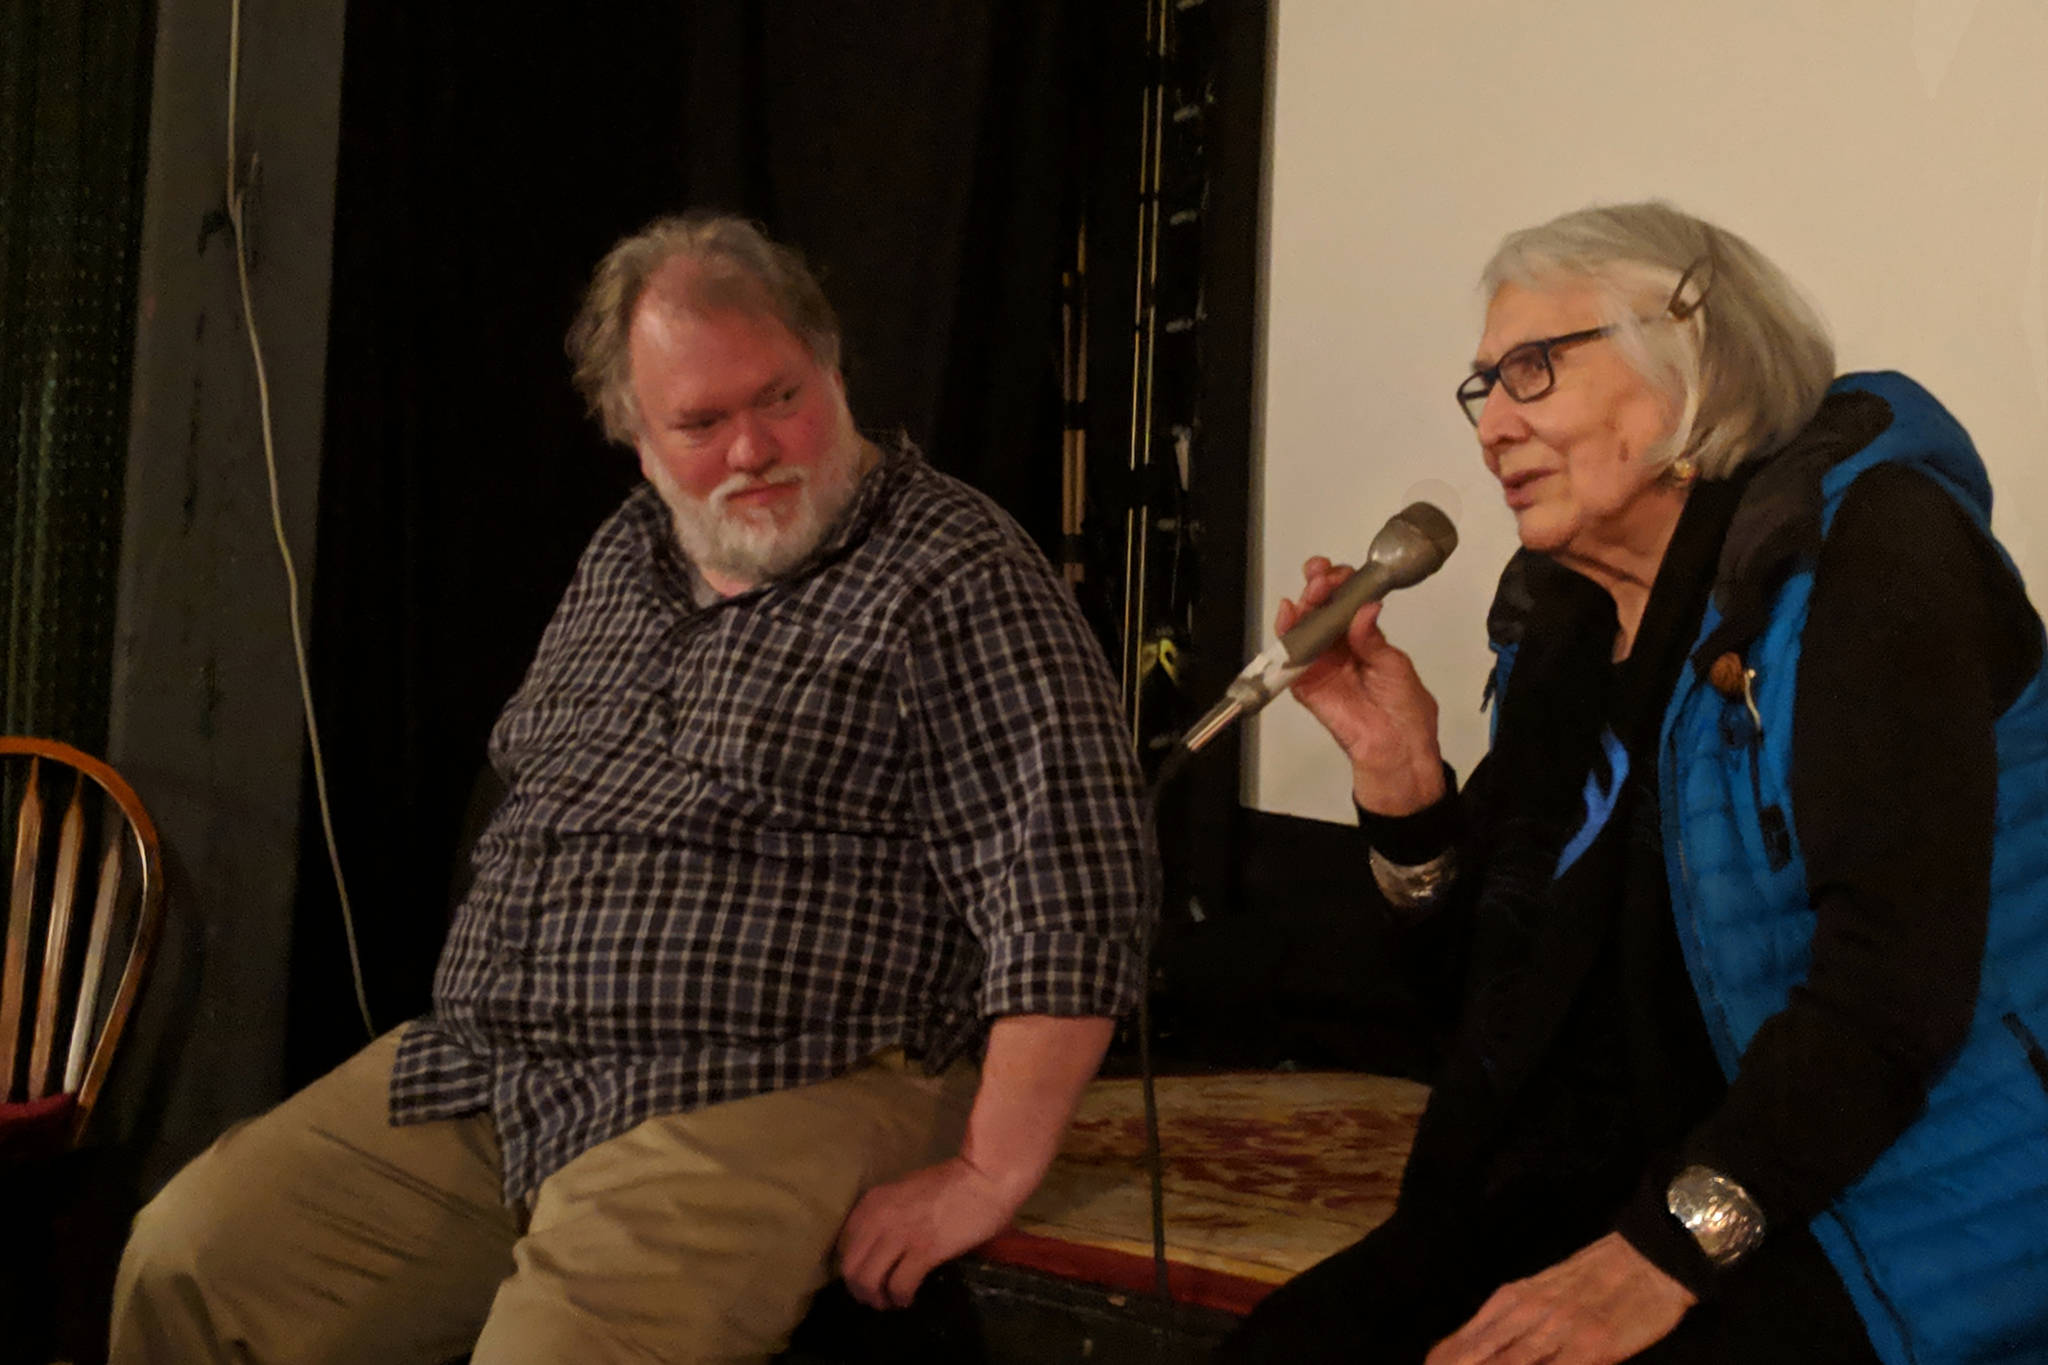 Curator of collections for Alaska State Museums Steve Henrikson and weaver Delores Churchill talk after a screening of “Tracing Roots,” Sunday, March 31, 2019. (Ben Hohenstatt | Capital City Weekly)